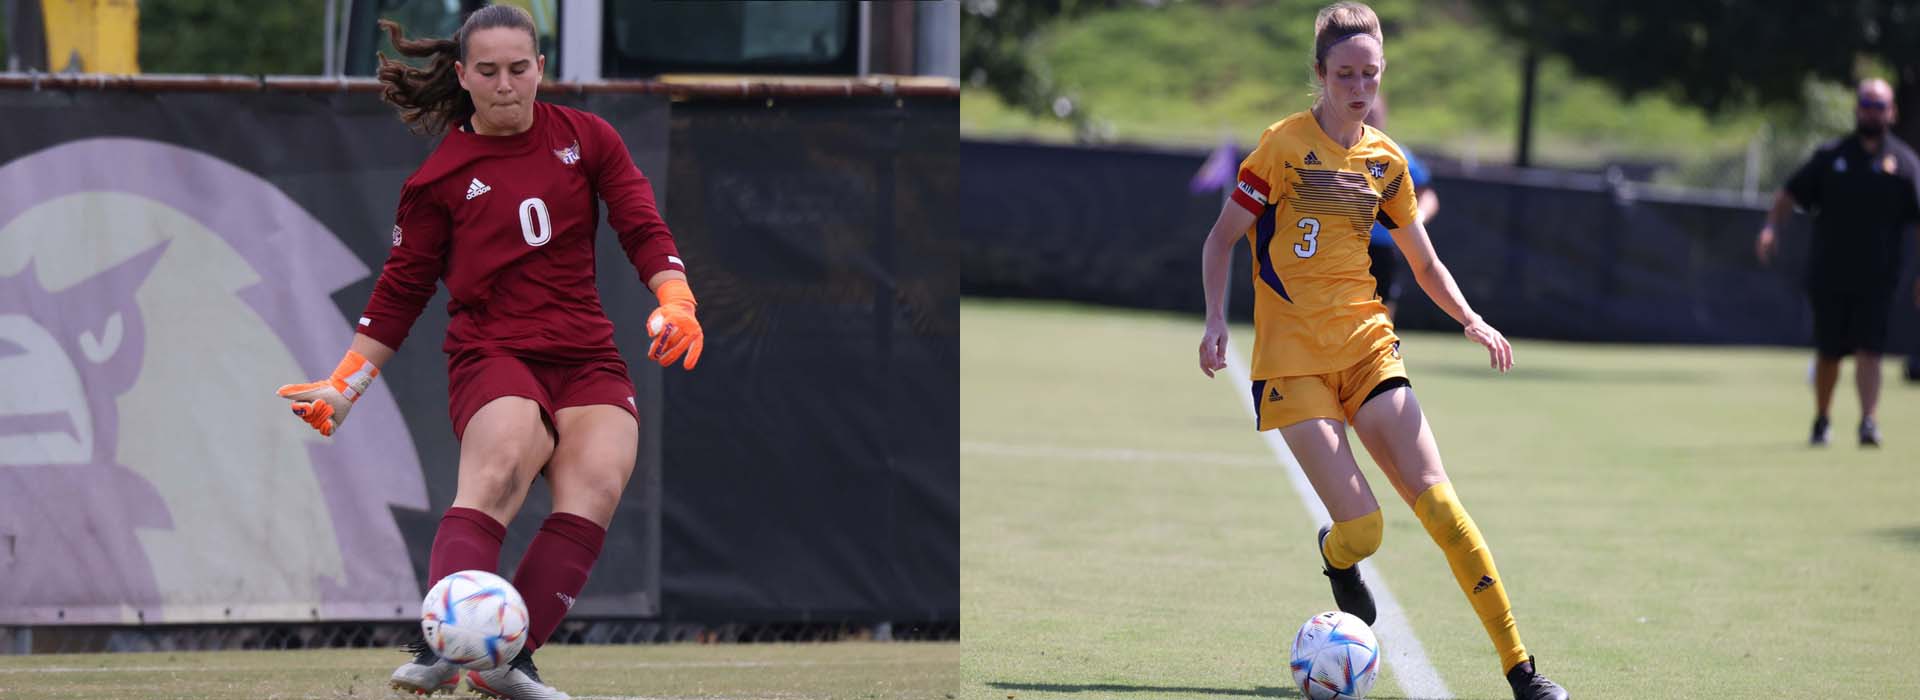 Smith honored as OVC Offensive Player of the Week, Conrad named Goalkeeper of the Week